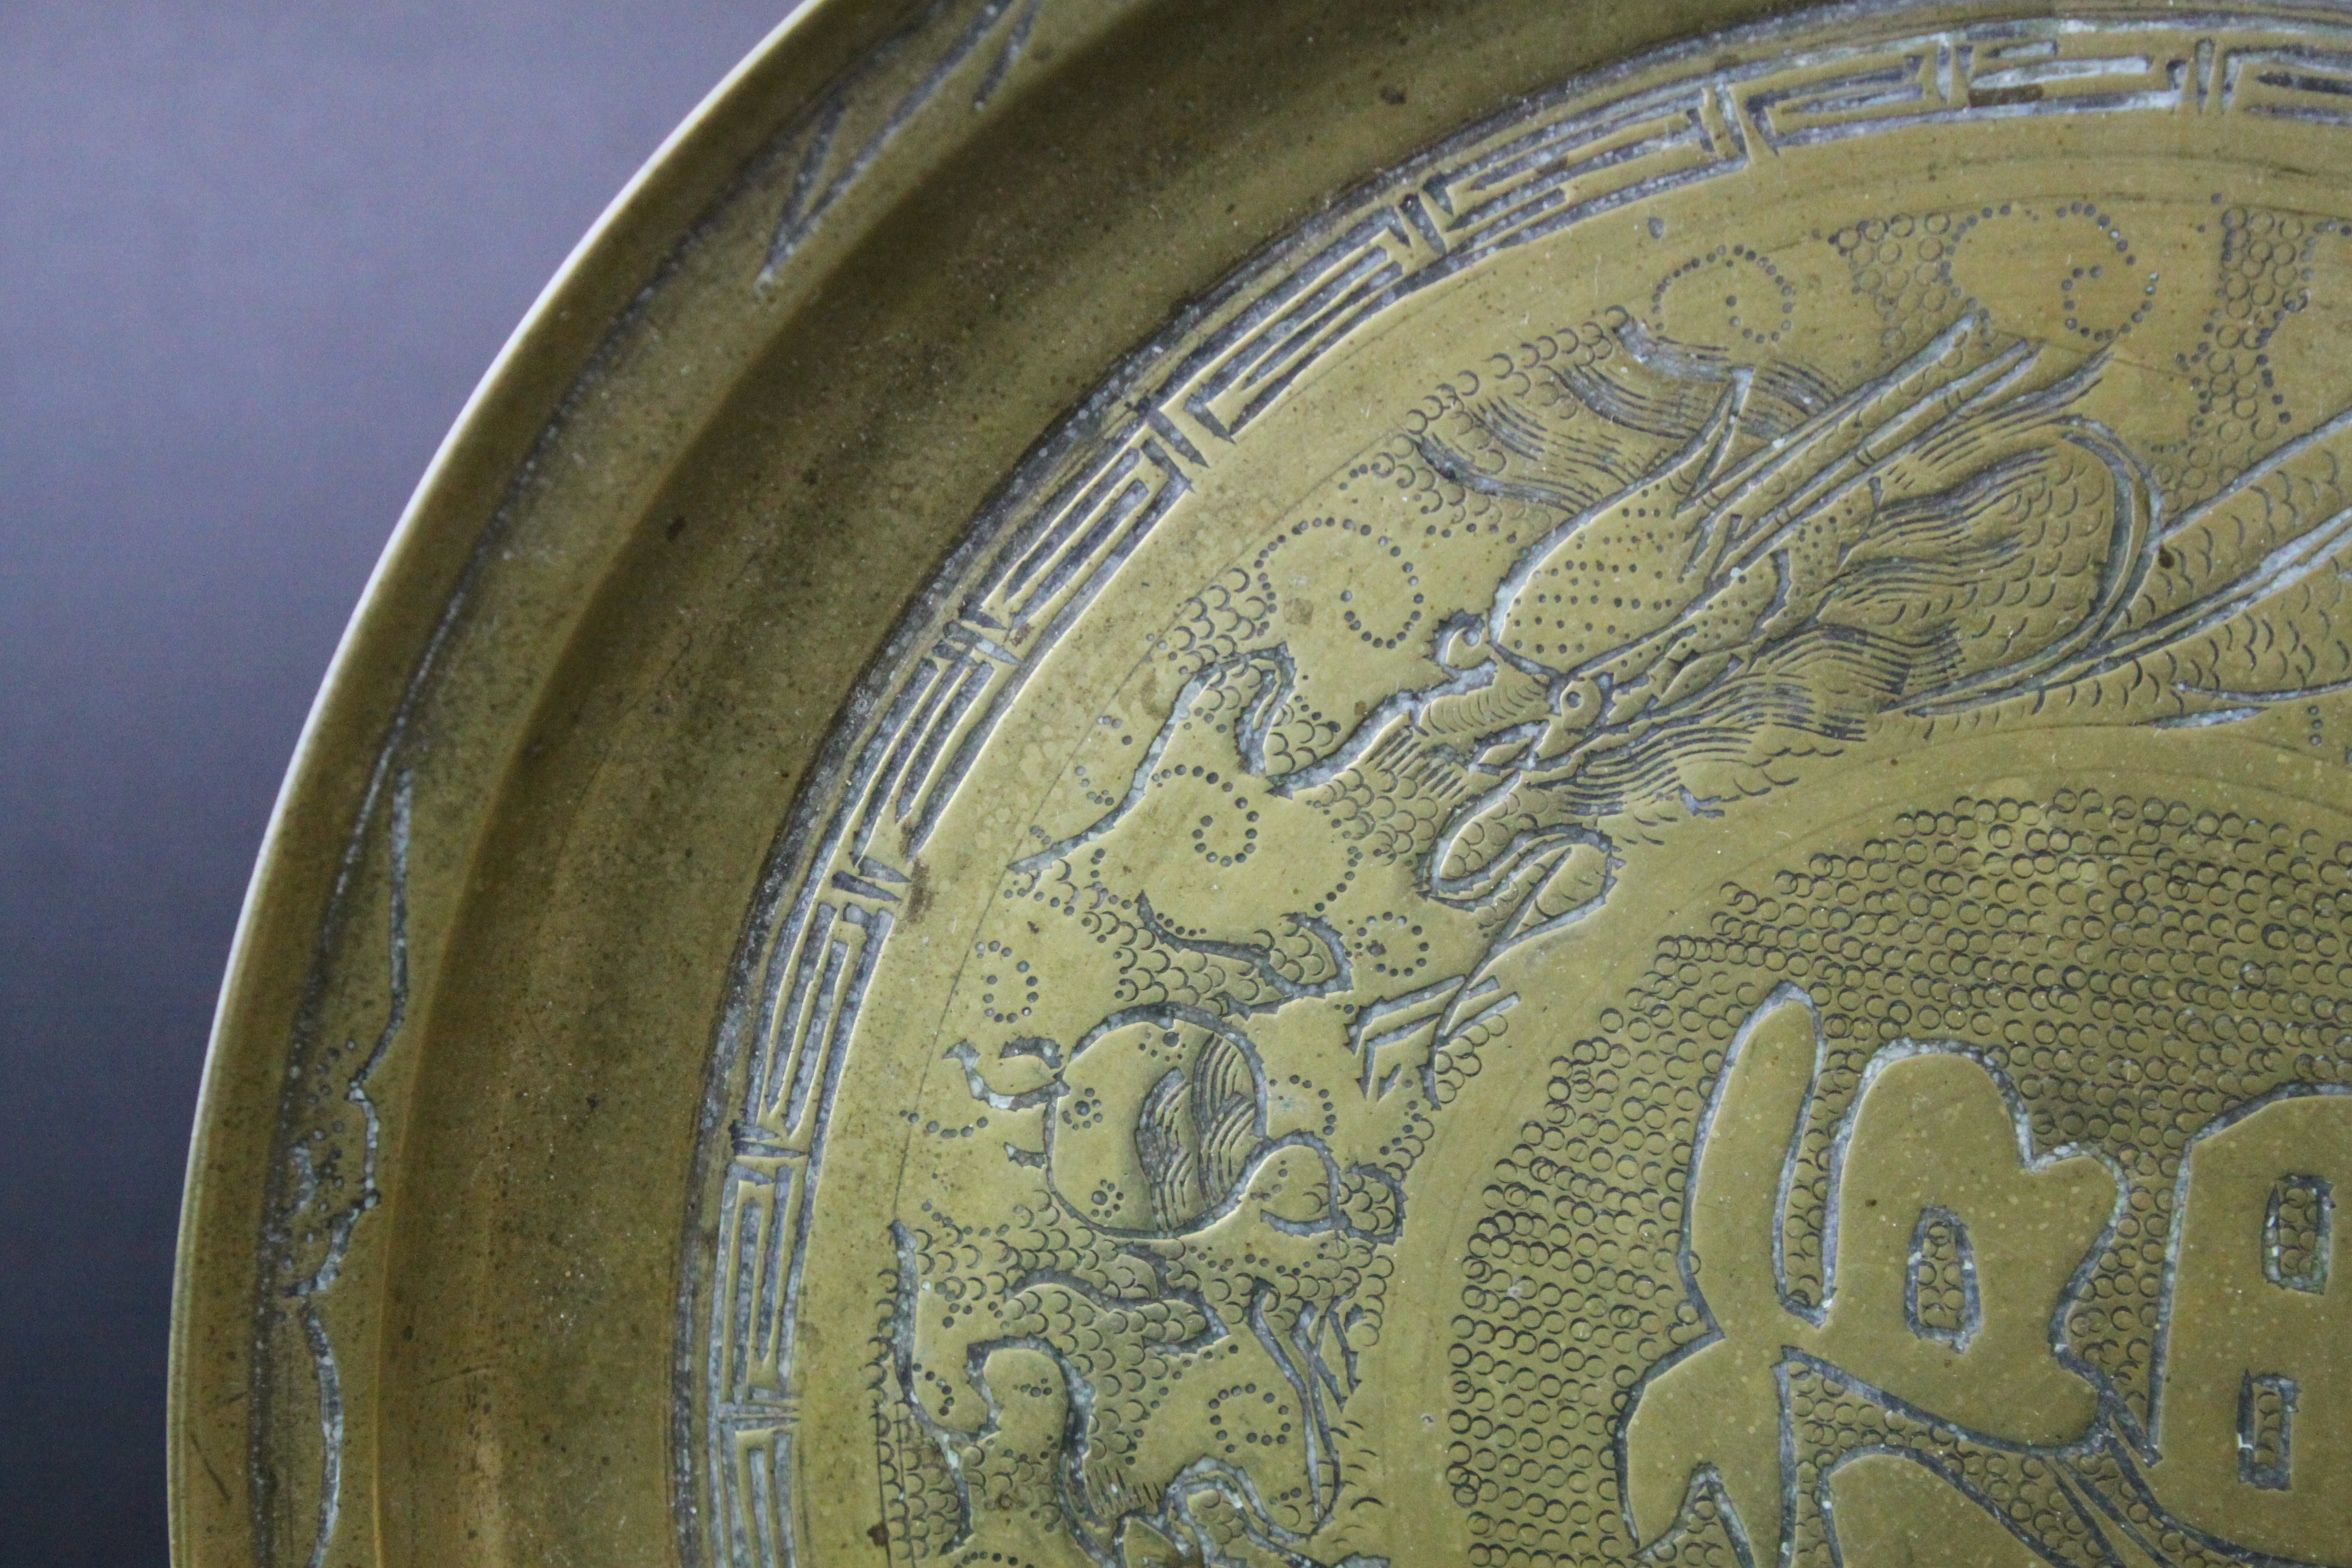 Chinese Bronze / Brass Shallow Dish engraved with Dragons, Birds and Text, 25cms diameter - Image 3 of 5